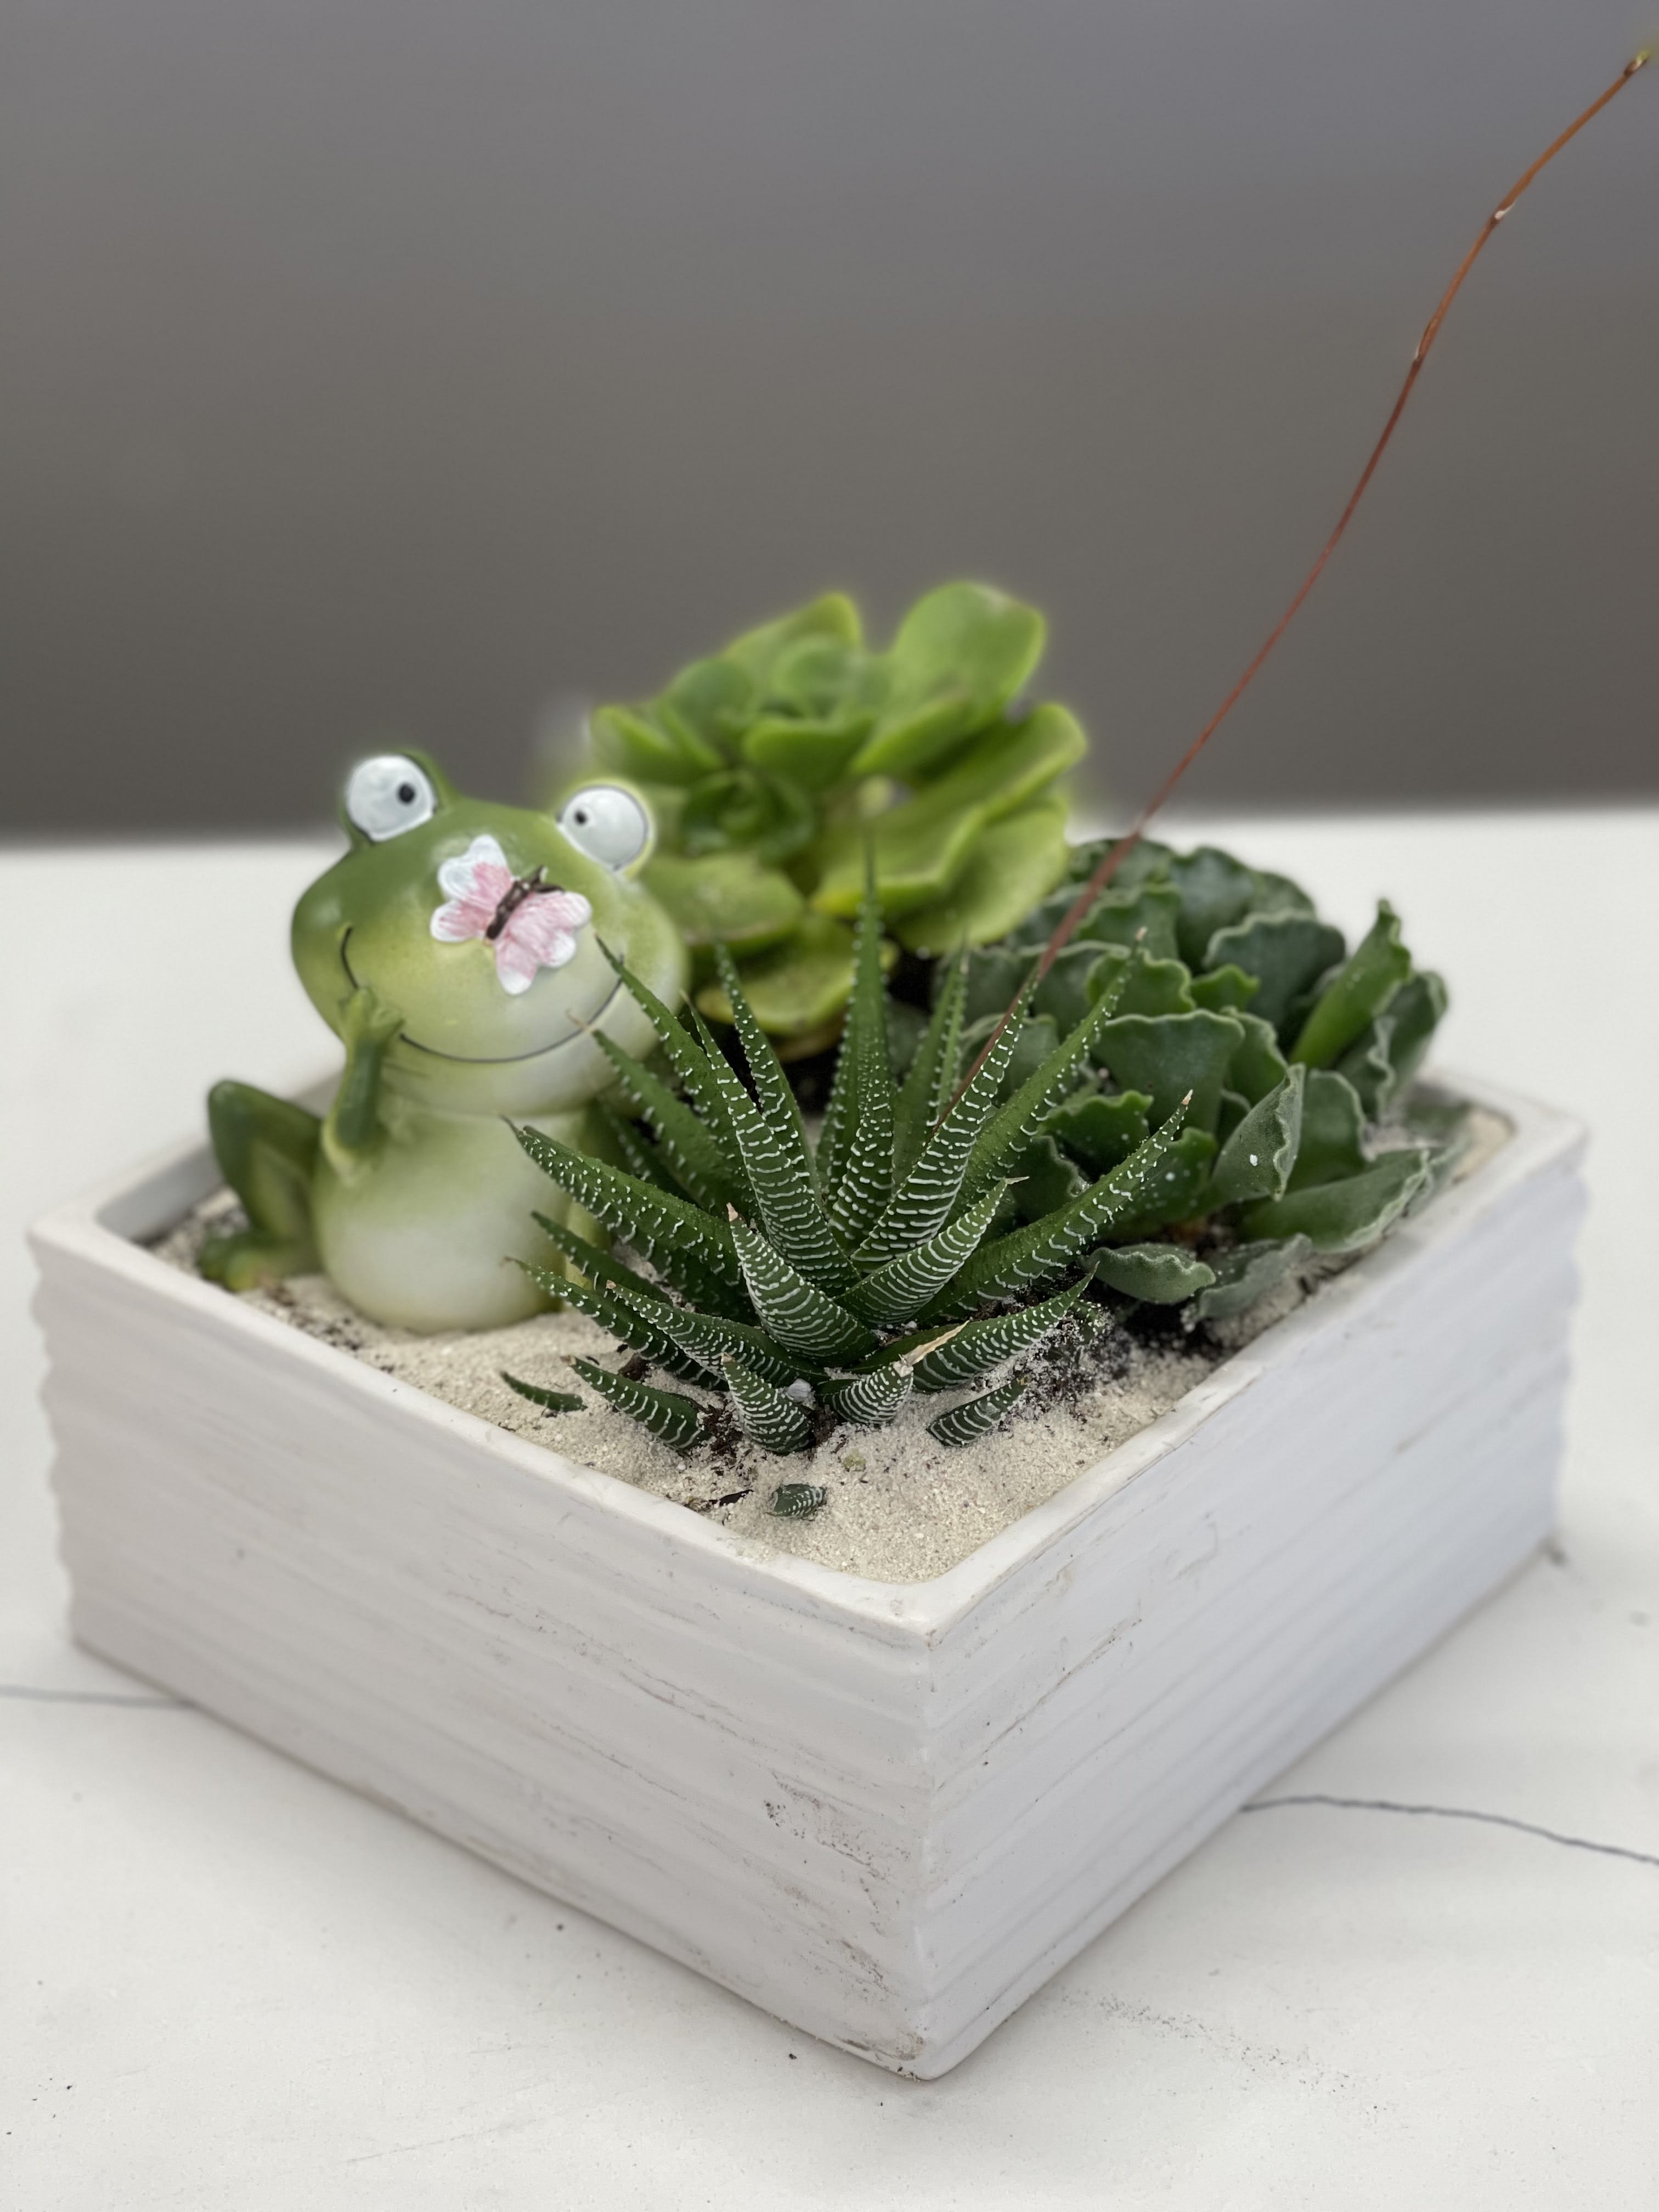 The Toad and their Butterfly  - Hang with these happy friends at your work desk or send to a loved one in this easy to care for succulent garden- Just lightly water once the soil is dry!